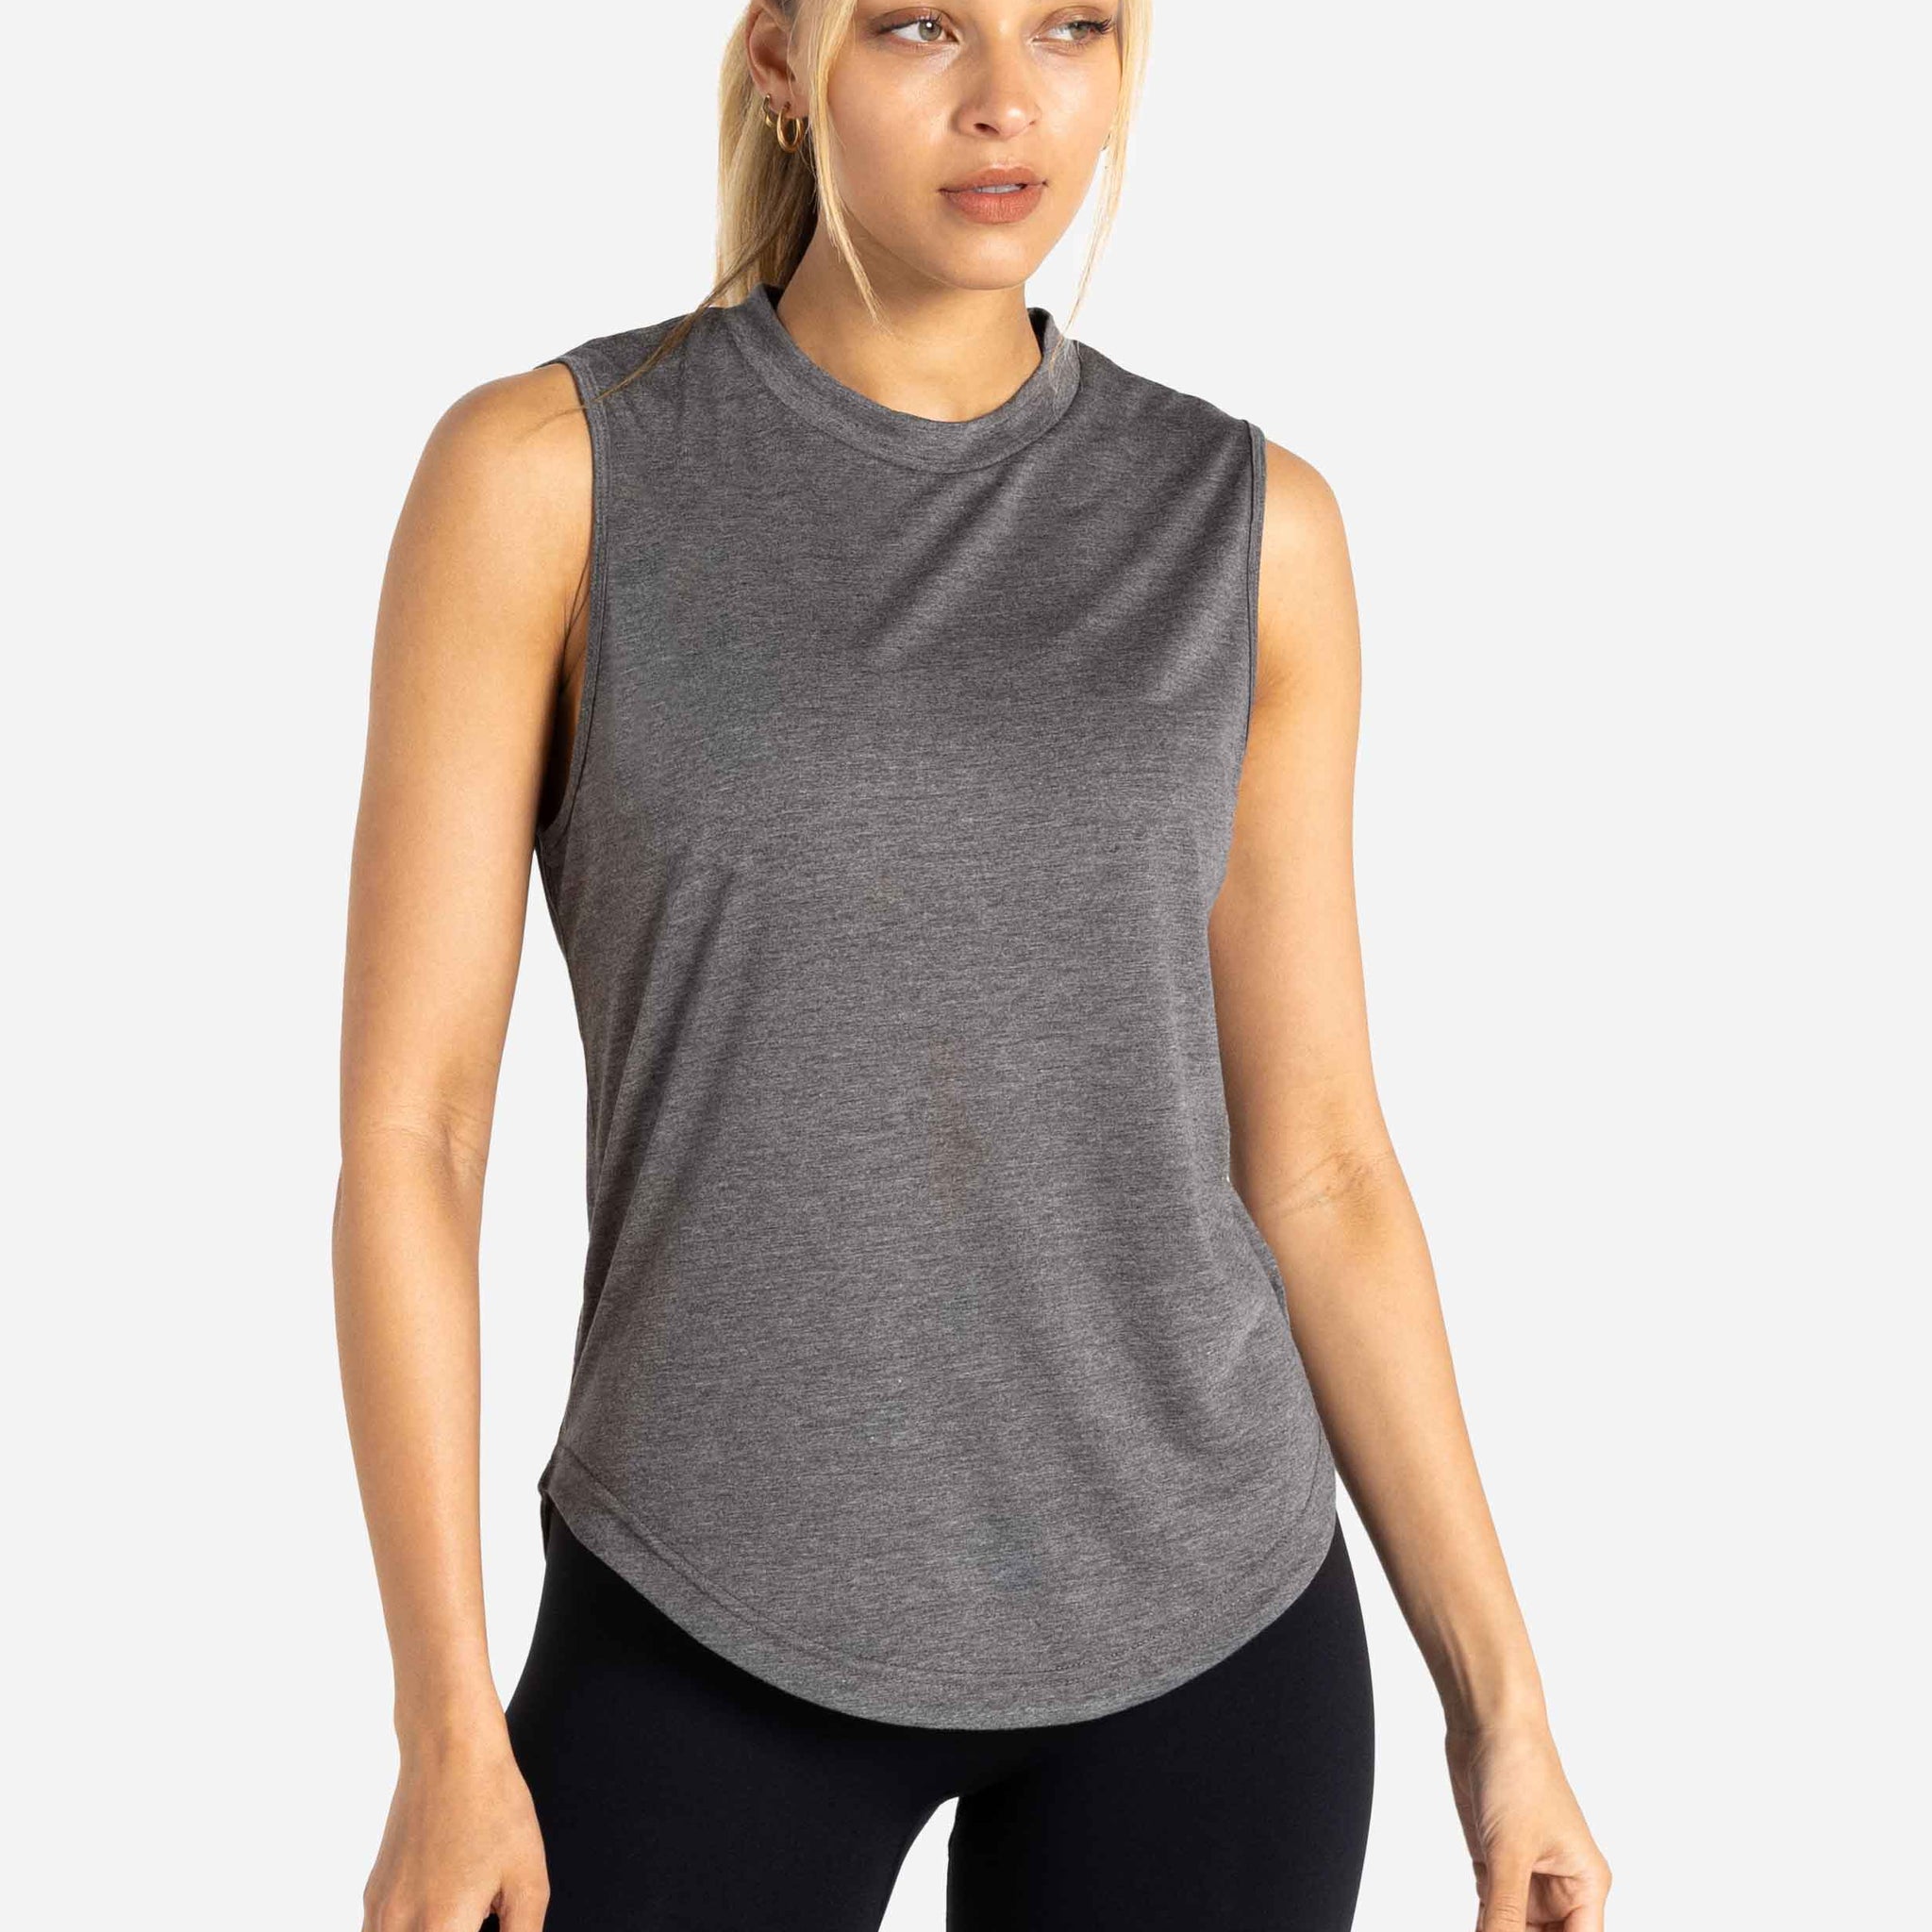 Oversized Graphic Tank / Charcoal Black Pursue Fitness 2